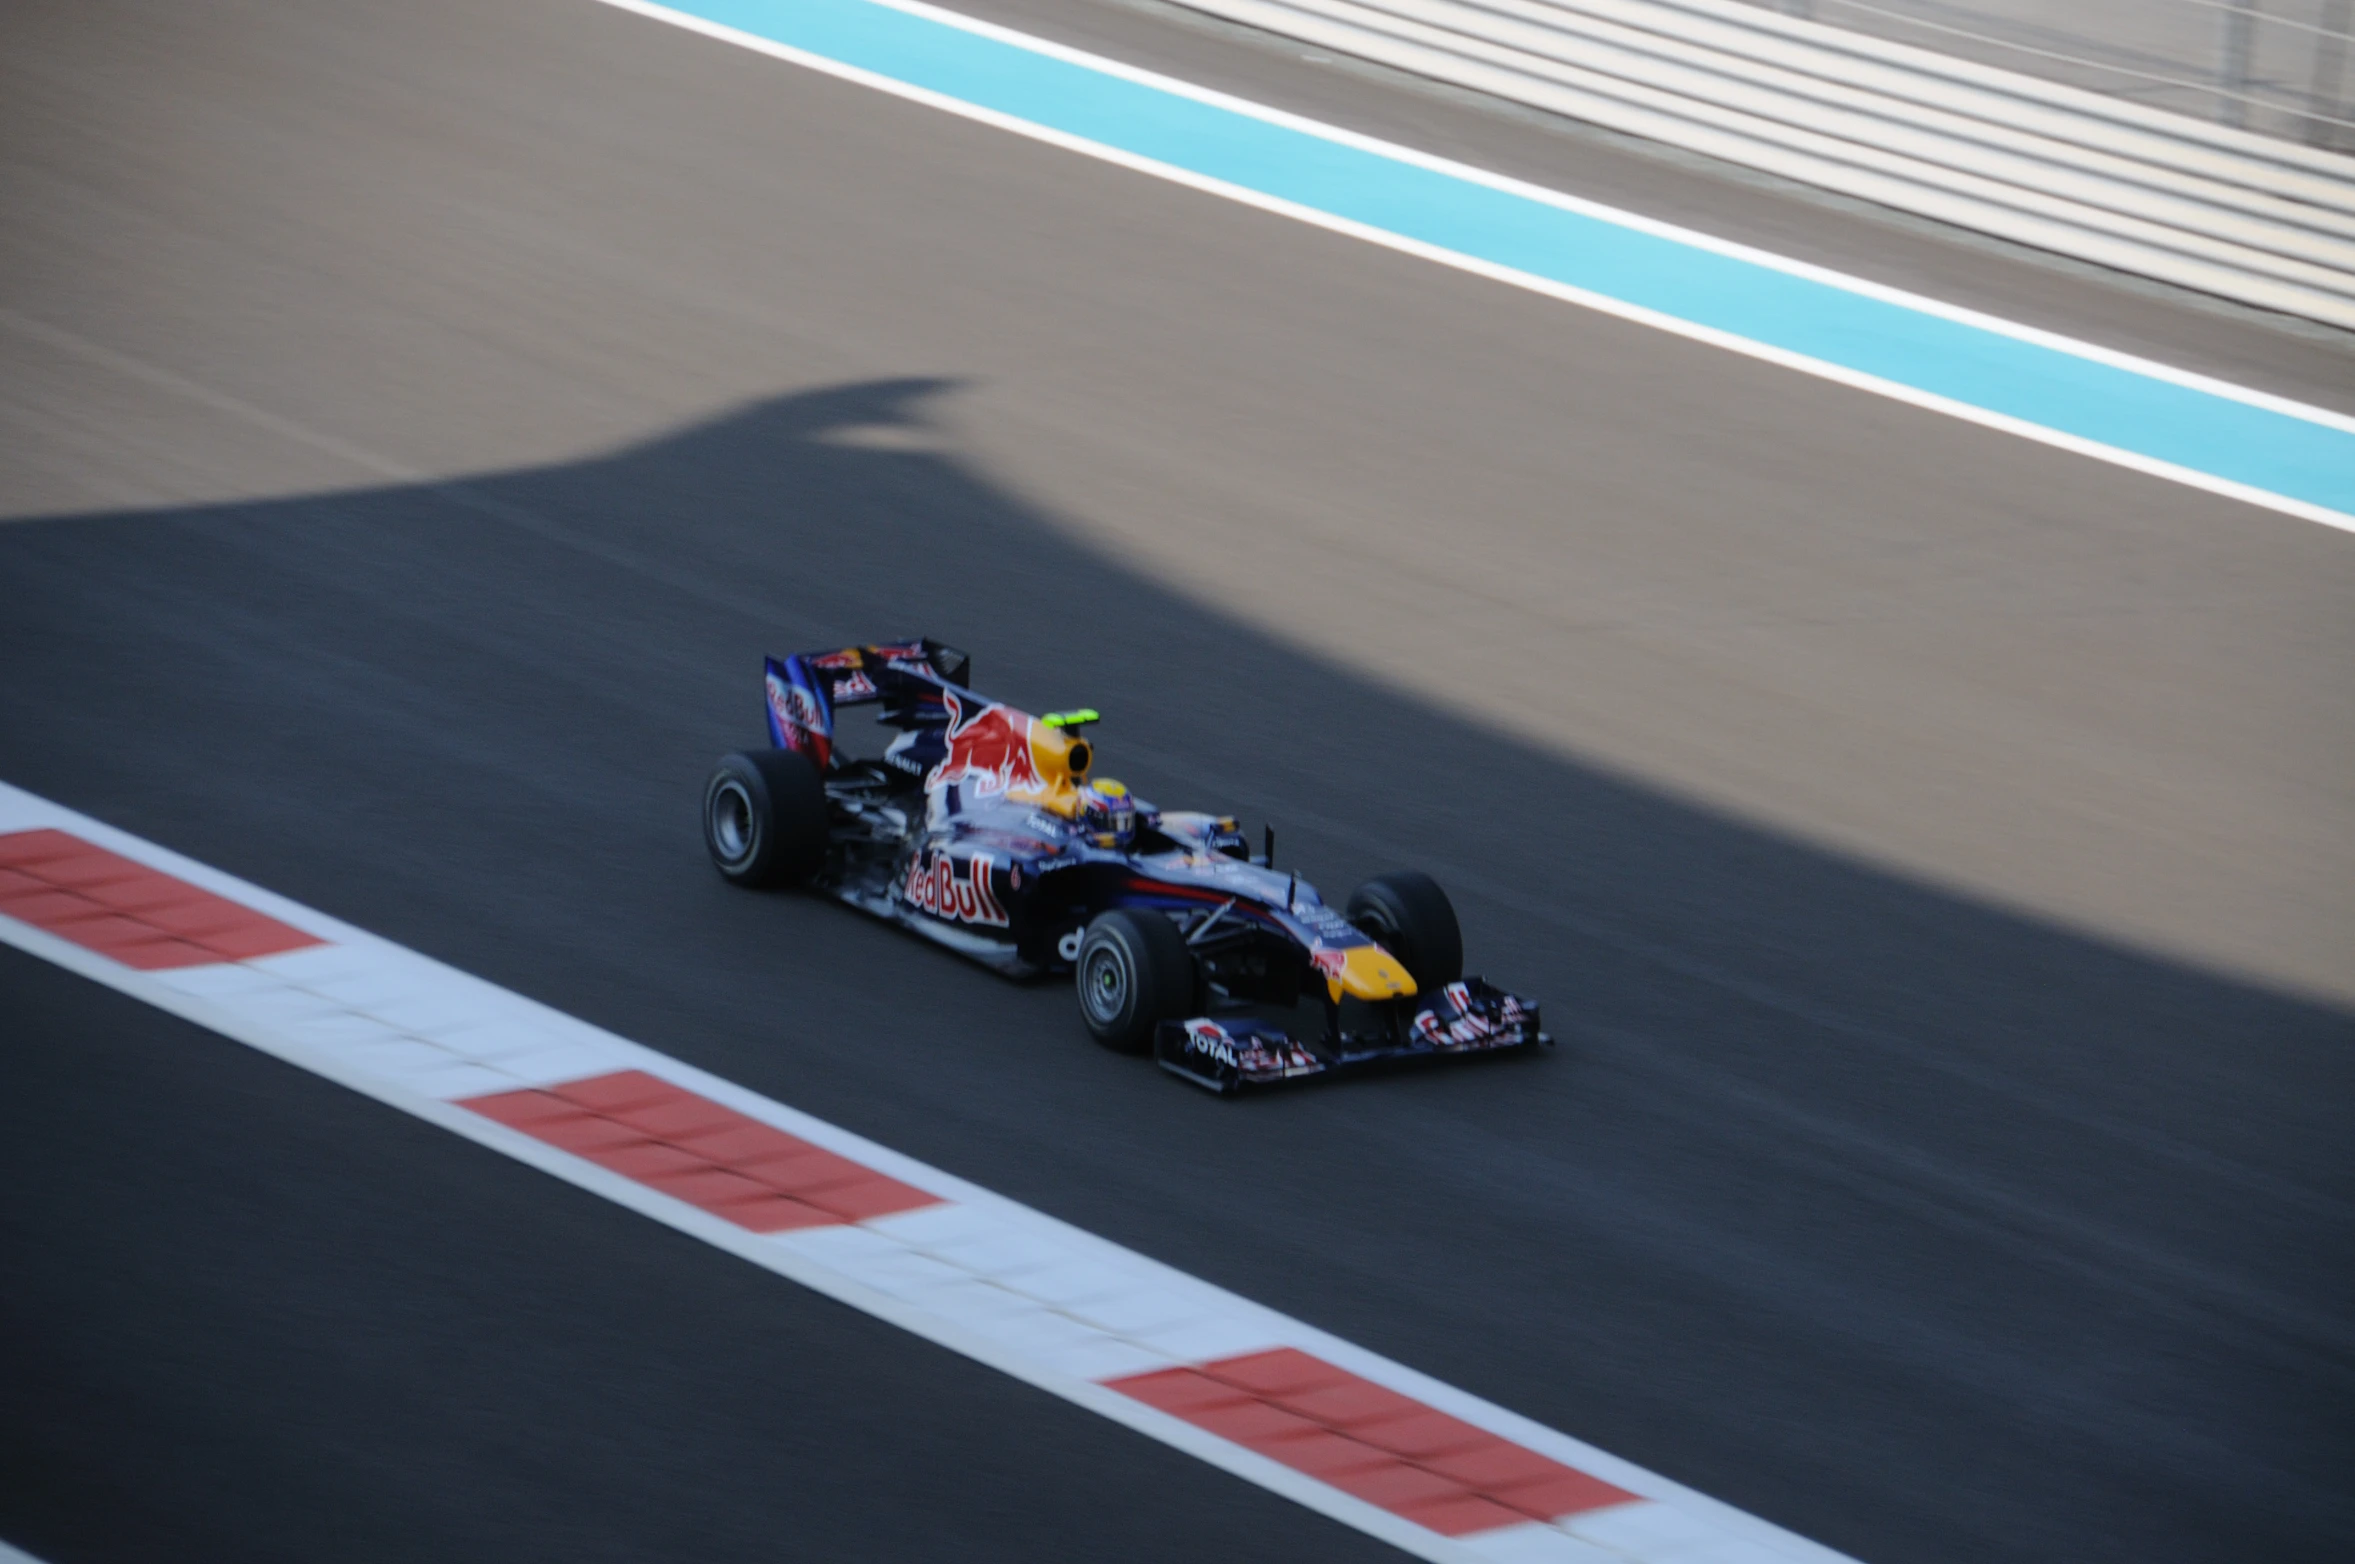 the red bull formula car speeds around the track